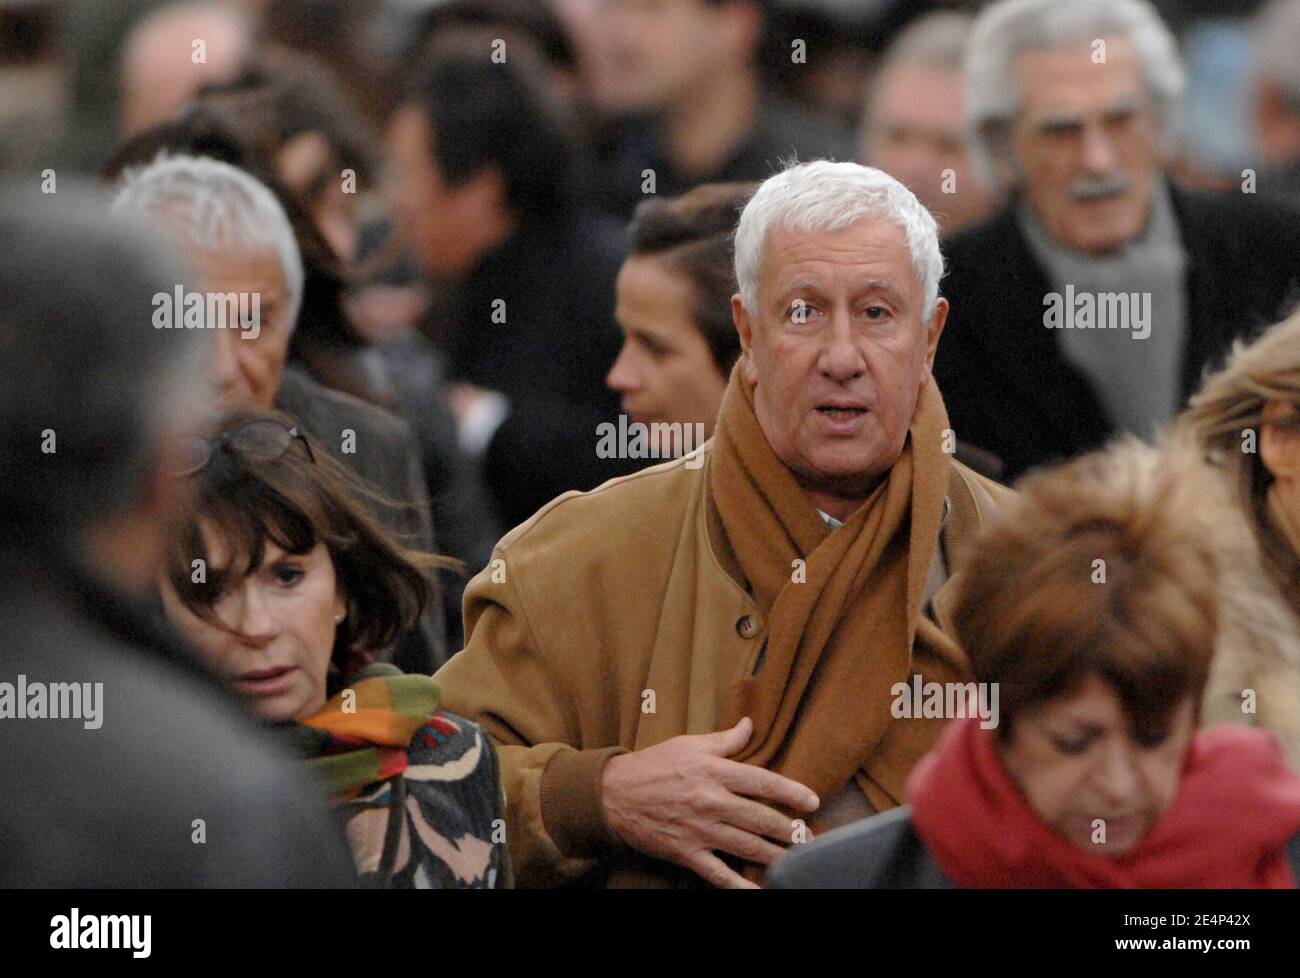 Stephane Collaro arrives at St Germain church to attend the funeral mass of singer Carlos in Paris, France on January 22, 2008. Photo by Guibbaud-Khayat-Mousse/ABACAPRESS.COM Stock Photo